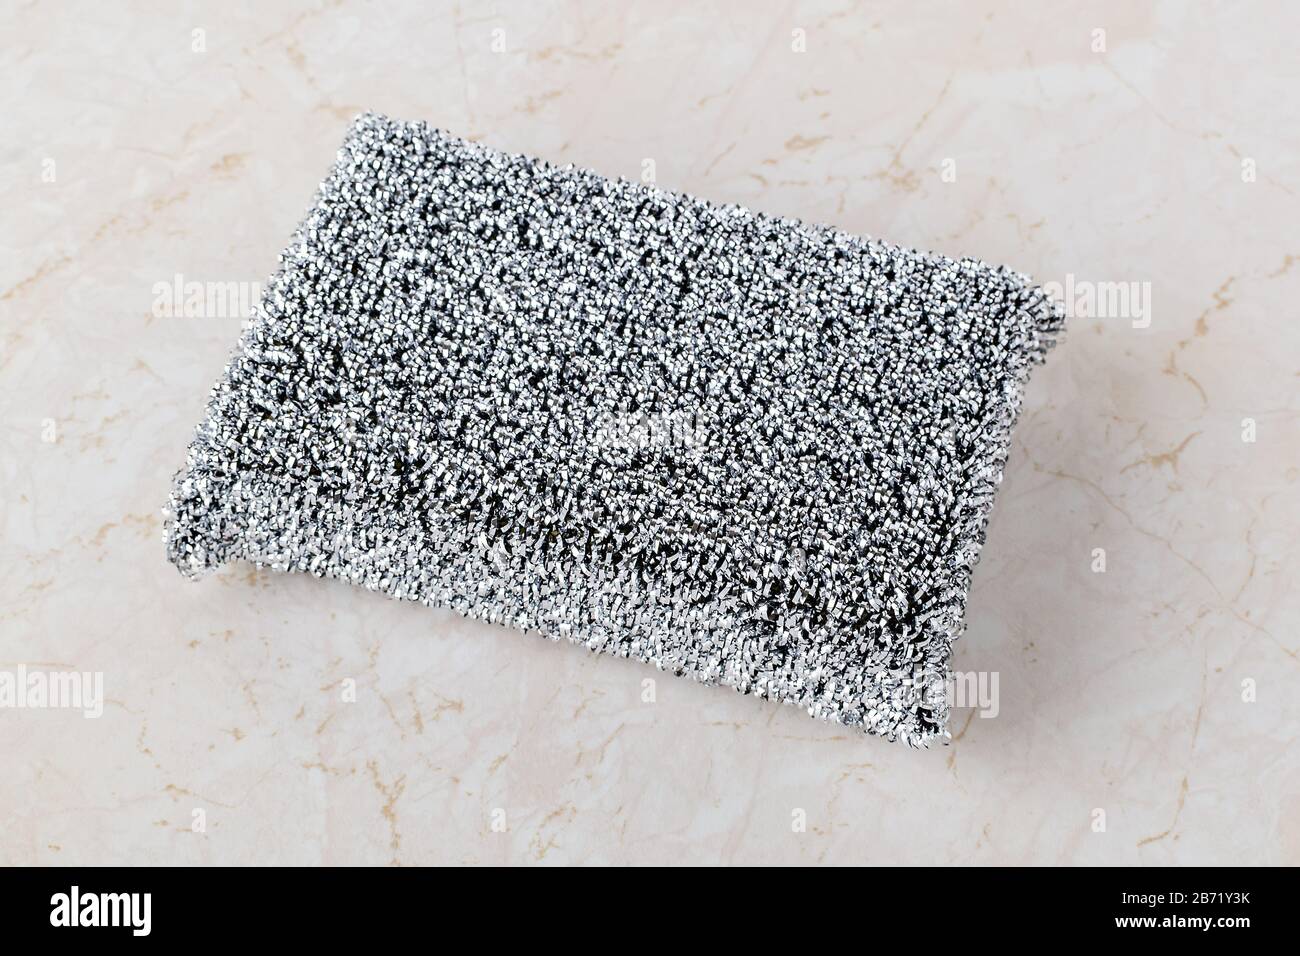 https://c8.alamy.com/comp/2B71Y3K/metallized-fiber-foam-sponge-for-dishes-and-housework-new-silver-foam-sponge-for-dishwashing-on-a-kithen-table-purity-and-household-chores-2B71Y3K.jpg